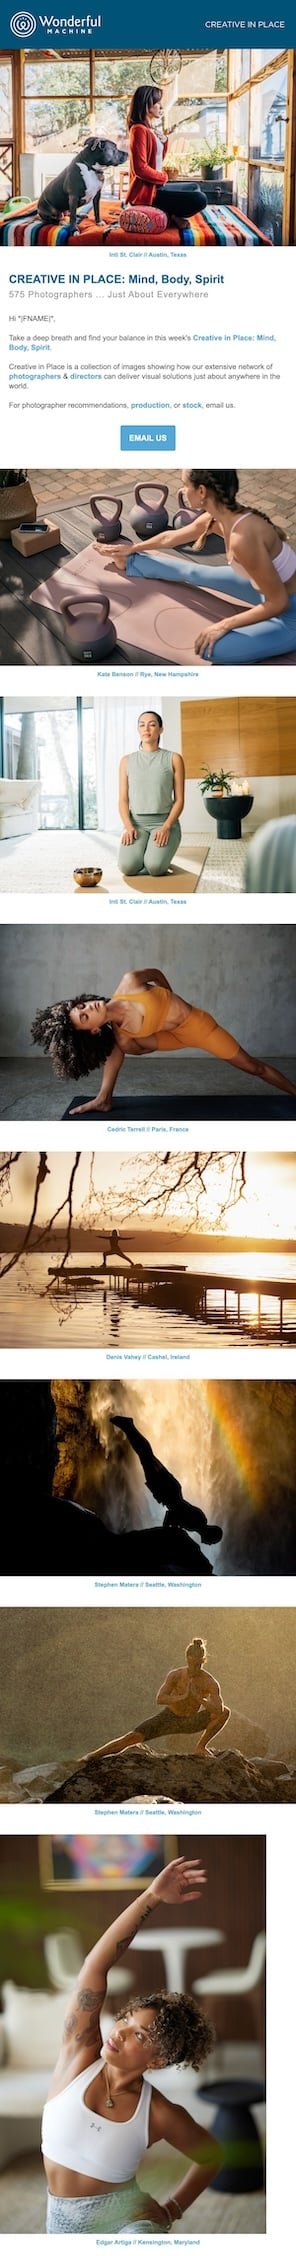 A screenshot of our yoga photography emailer - Creative in Place: Mind, Body, Spirit.